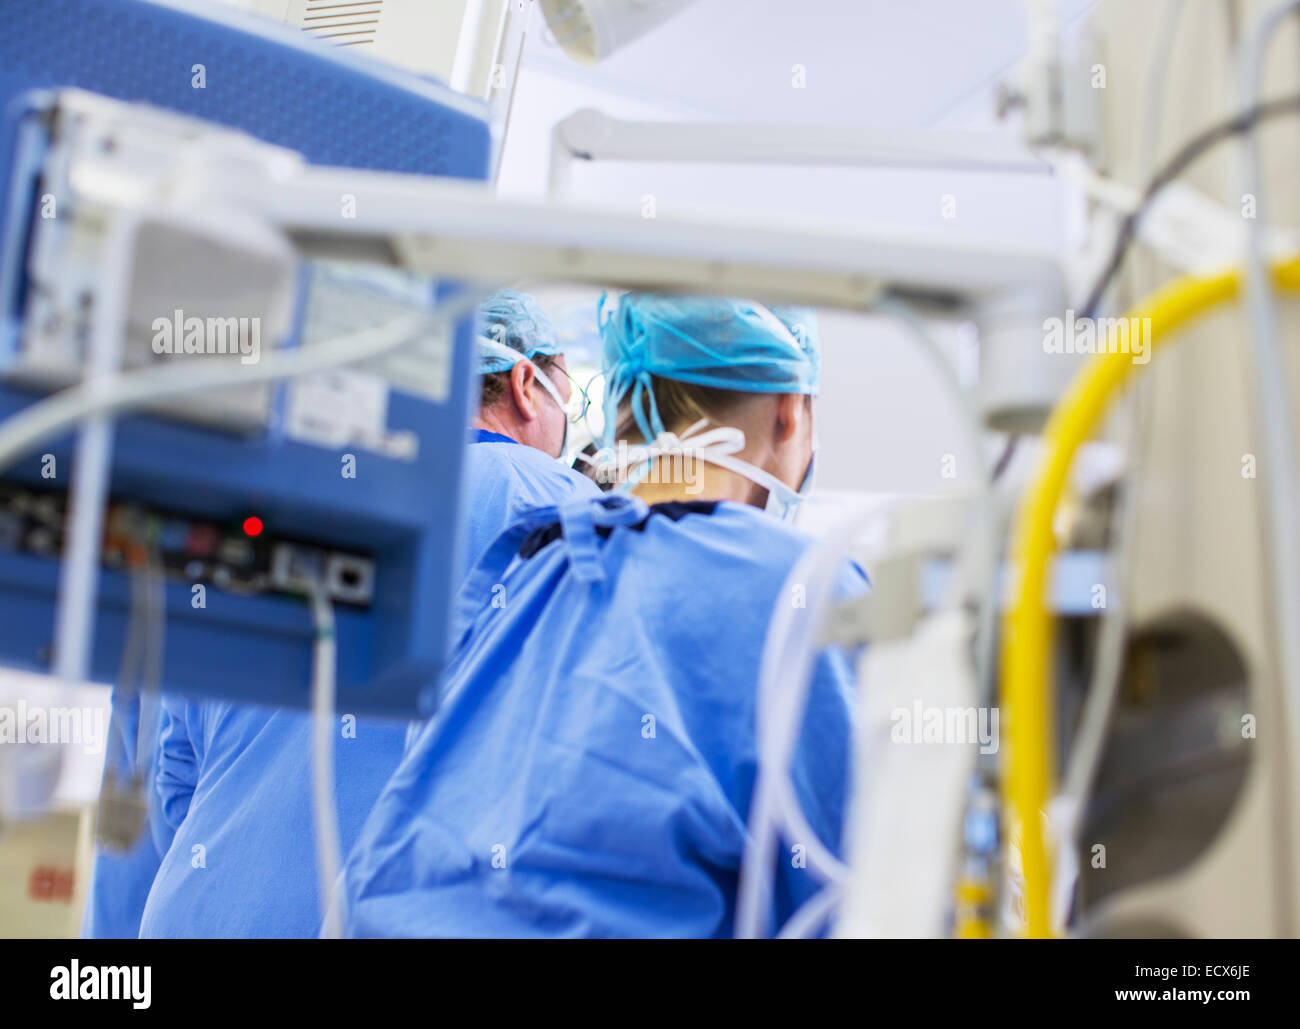 Rear view of doctors in operating theater, medical equipment in foreground Stock Photo